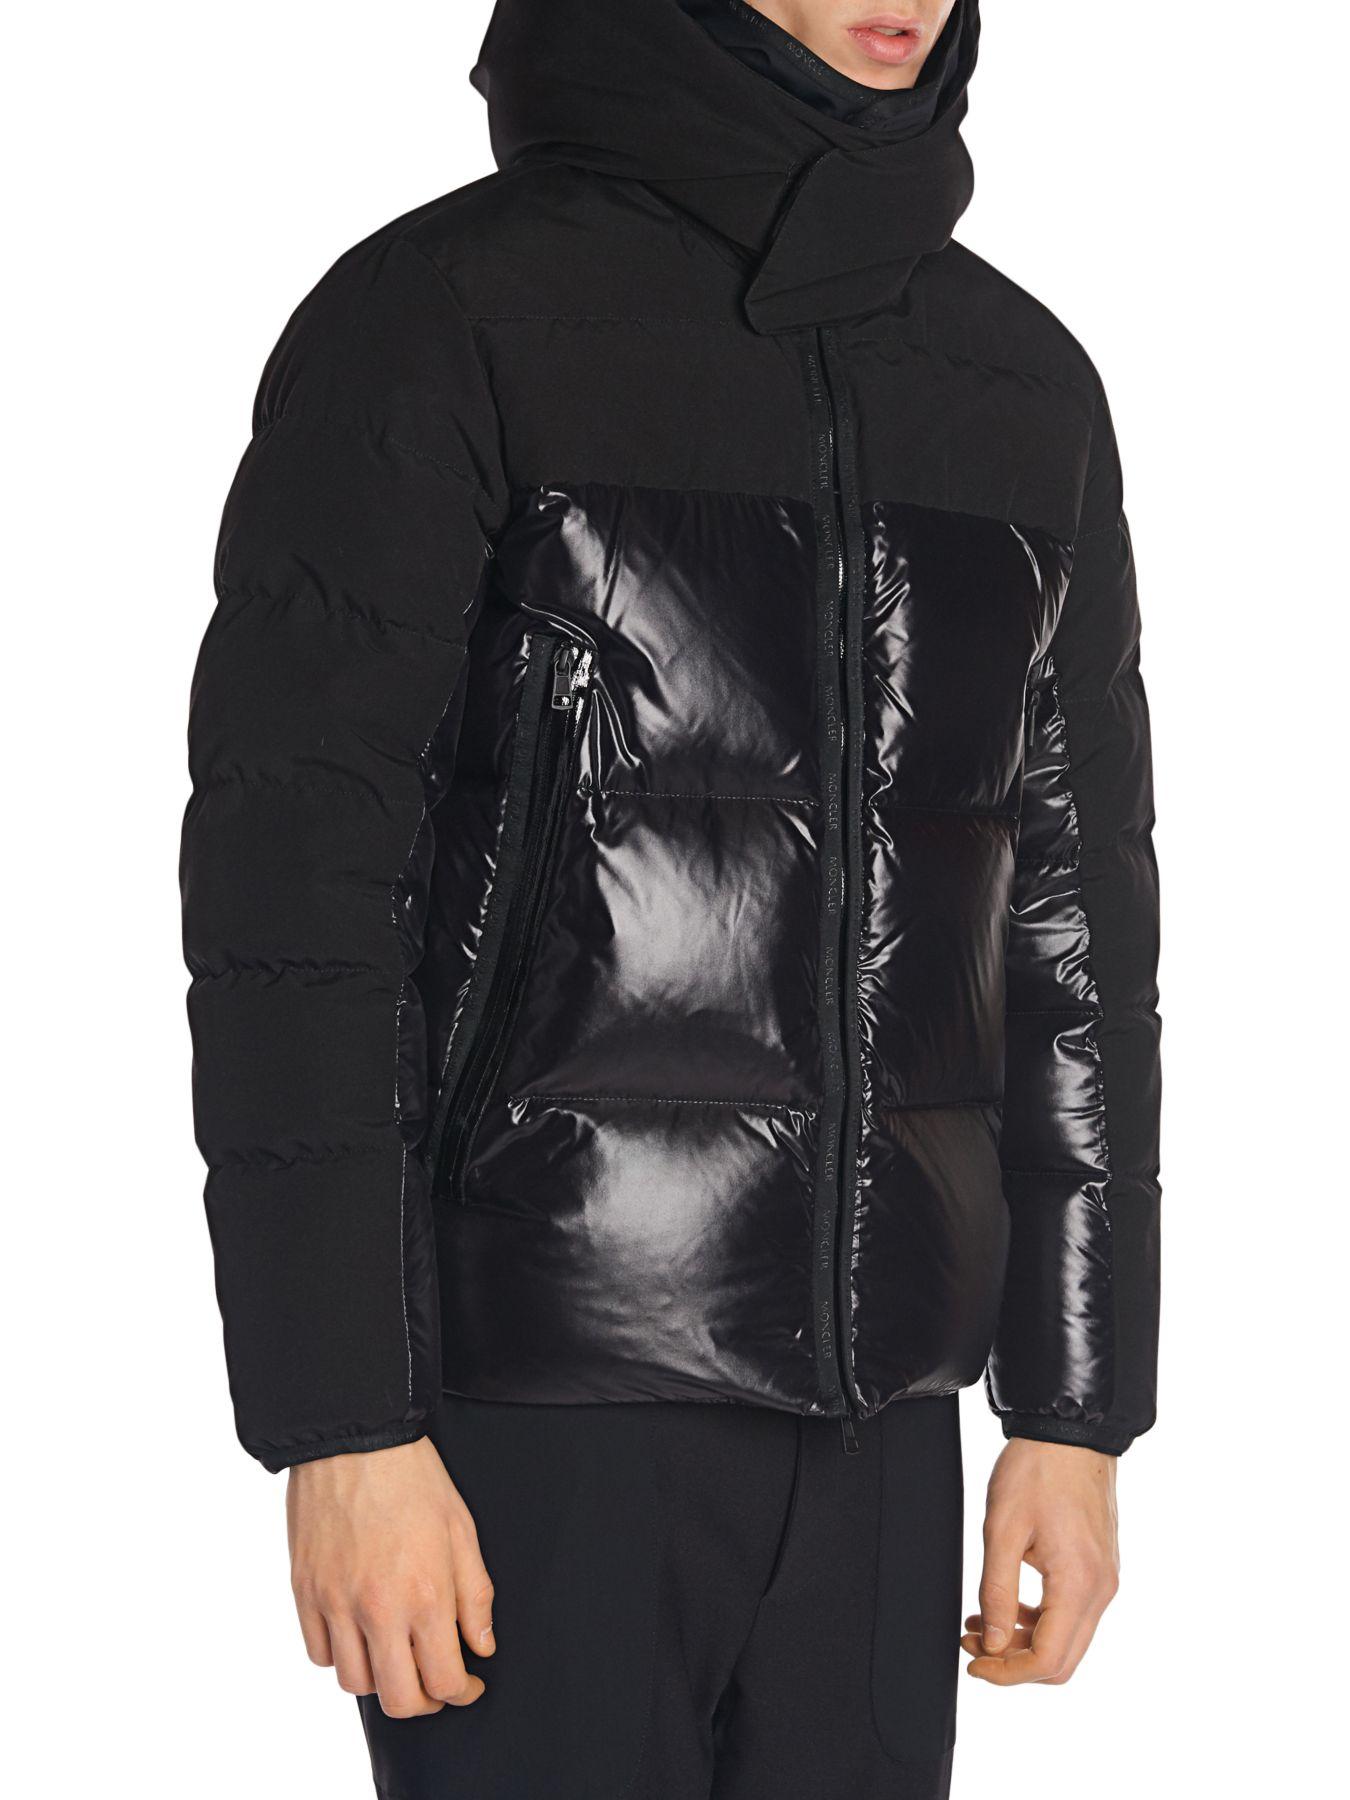 Moncler Mixed Media Puffer Jacket in Black for Men - Lyst